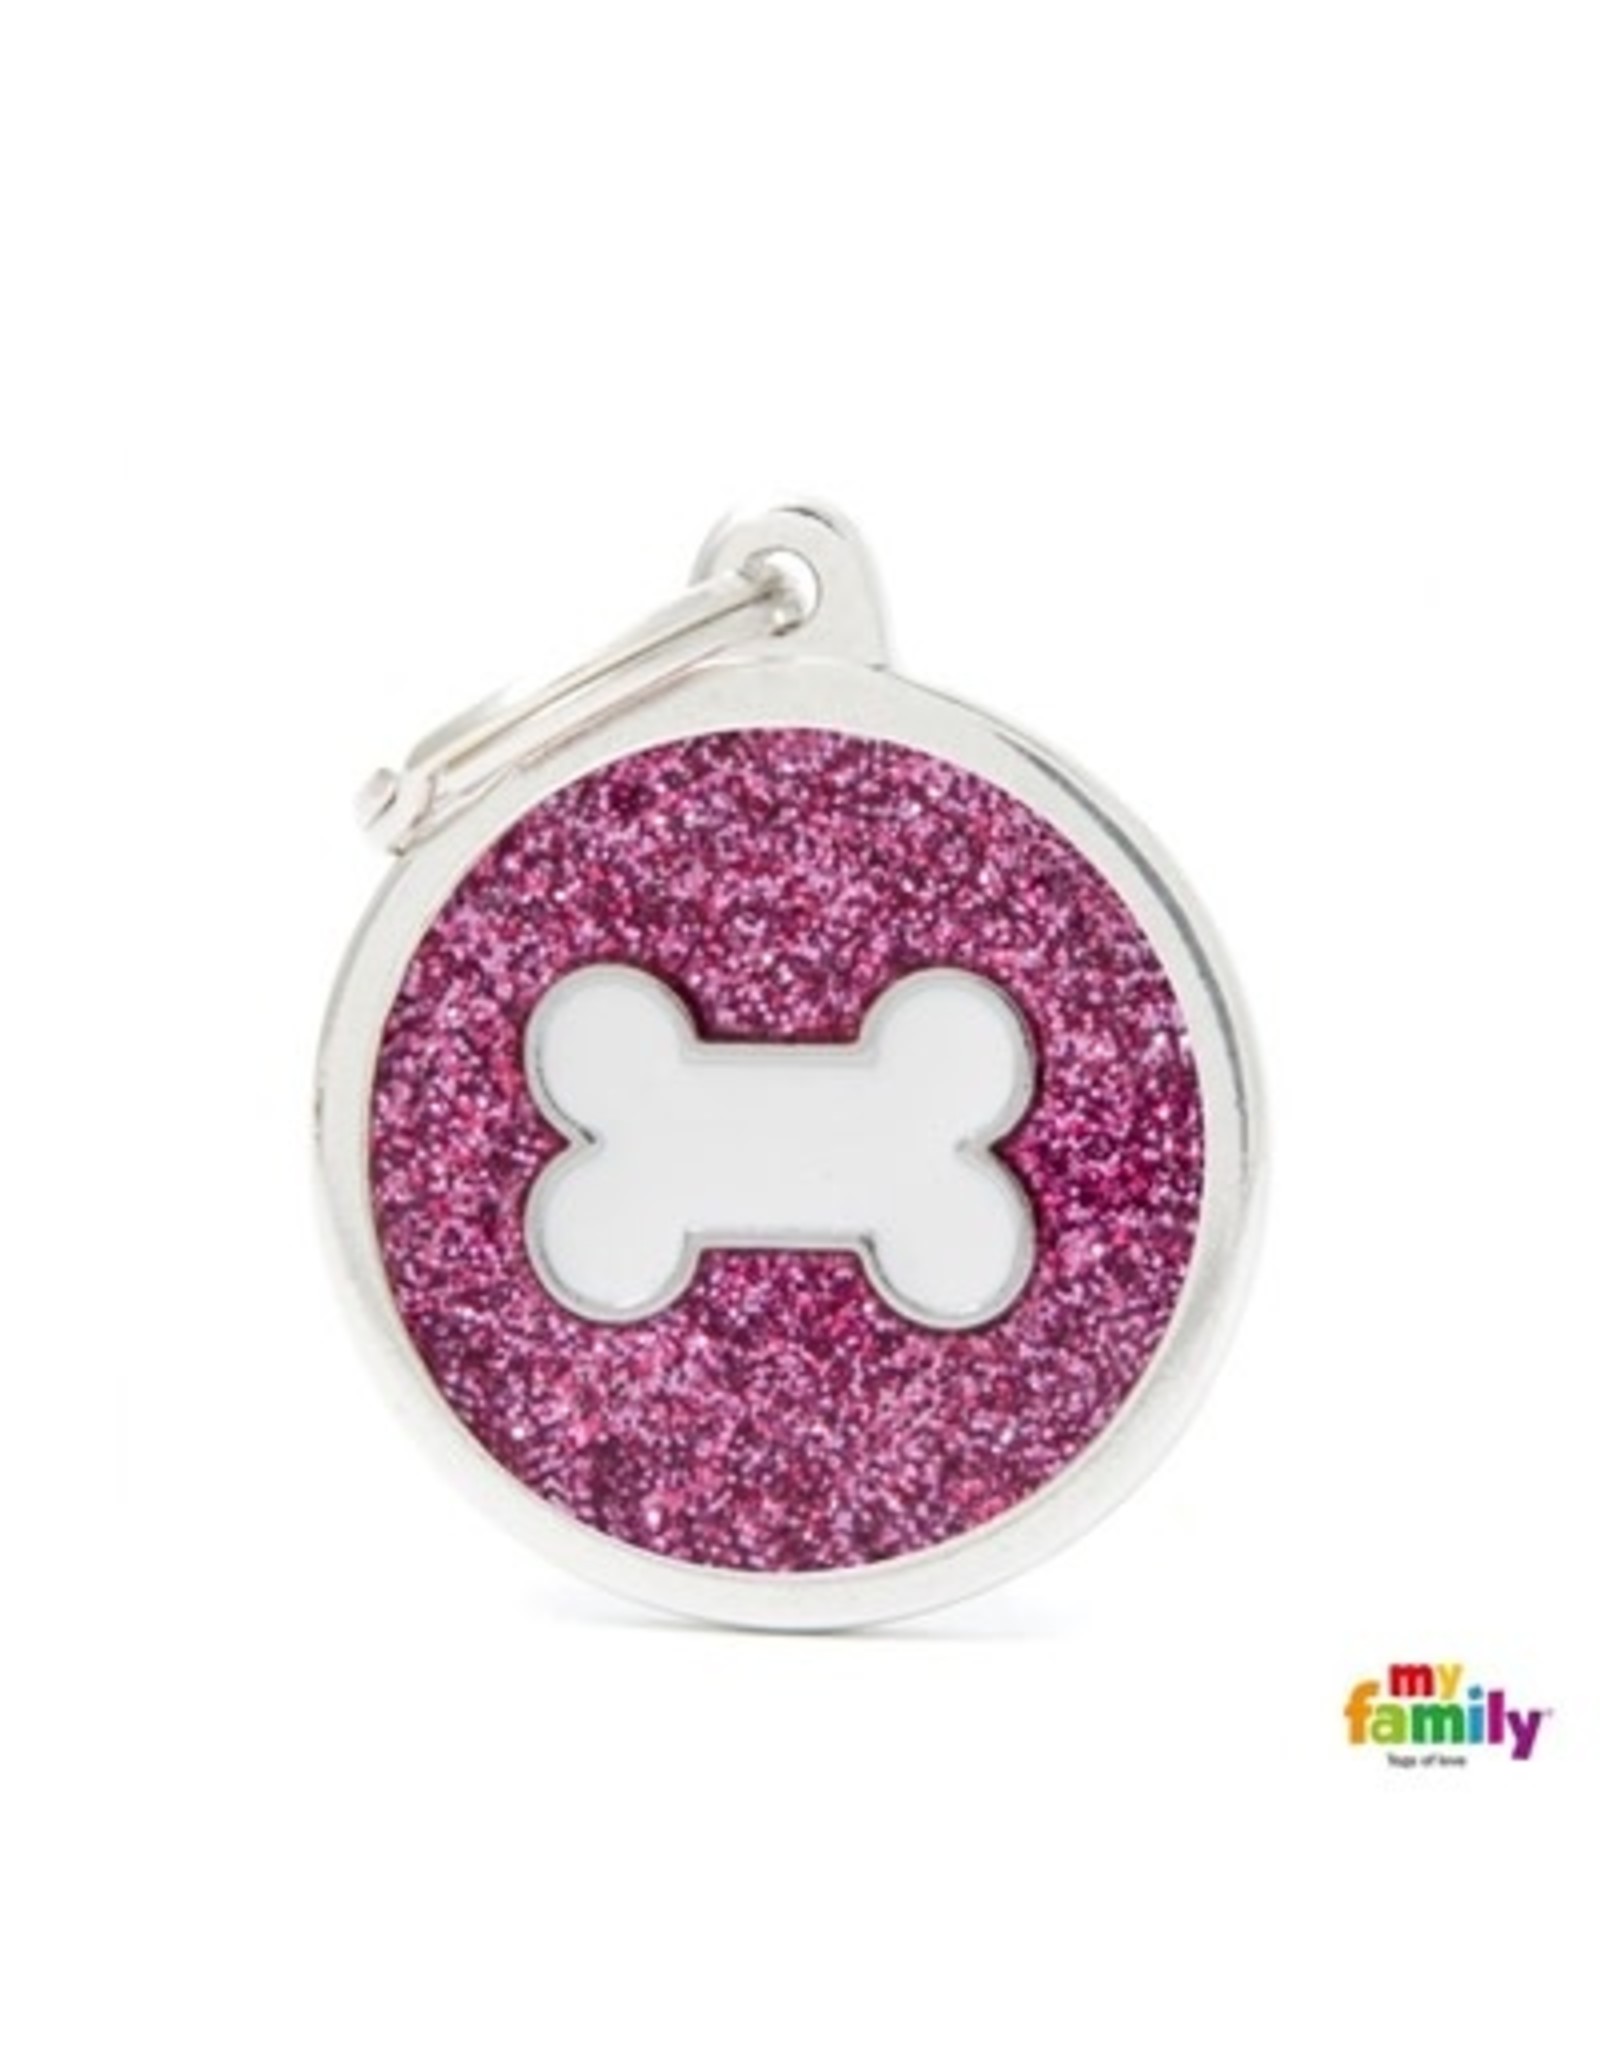 MyFamily Tag - Pink Big Glitter Circle with White Bone